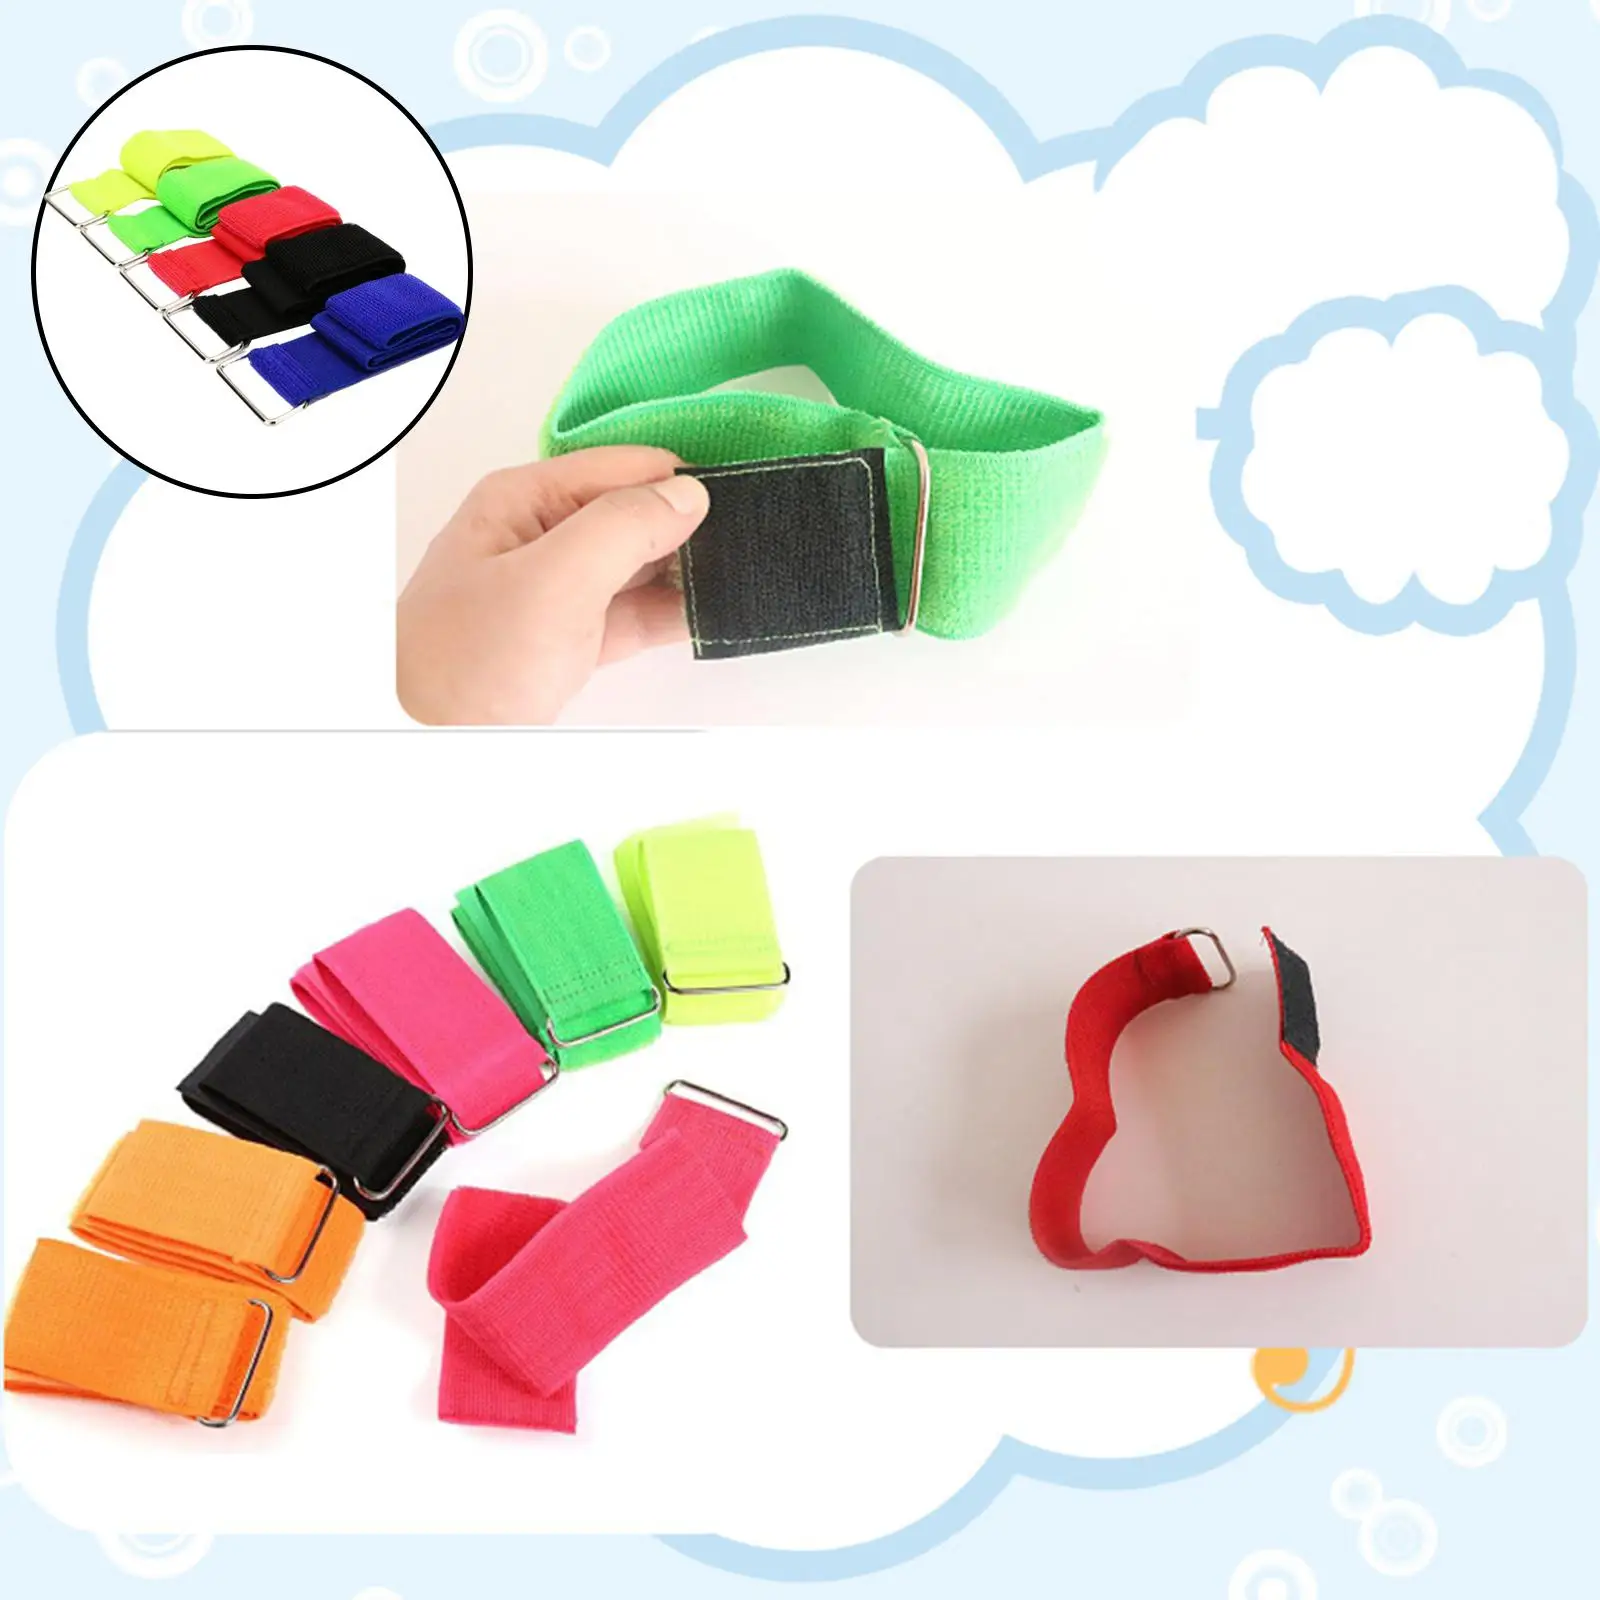 5x Firm Relay Race Game Bands Carnival Relay Race Game Exercise Teamwork Skills Race Bands Christmas Game for Adult Family